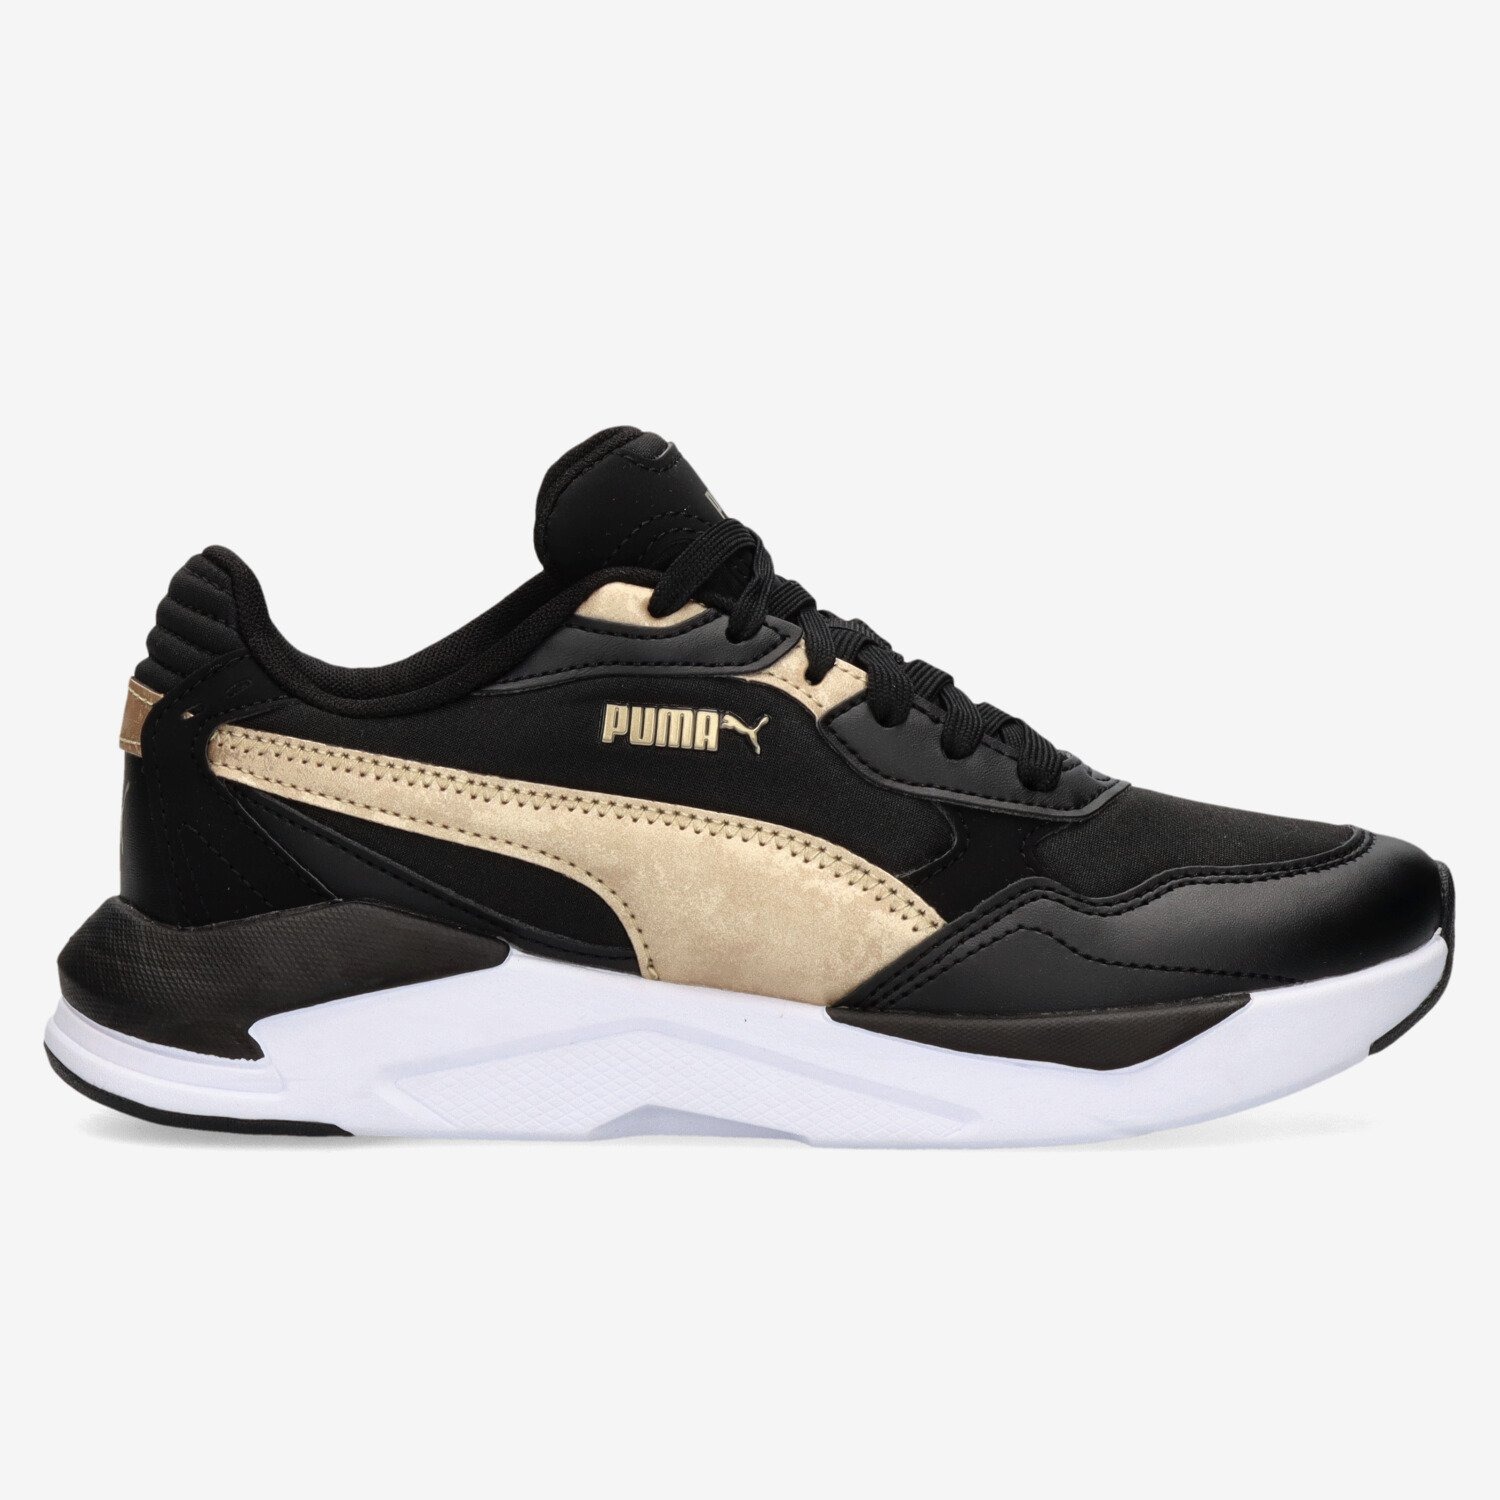 PUMA X-Ray Speed Lite Wns Dames Sneakers - Black/Gold - Maat 41